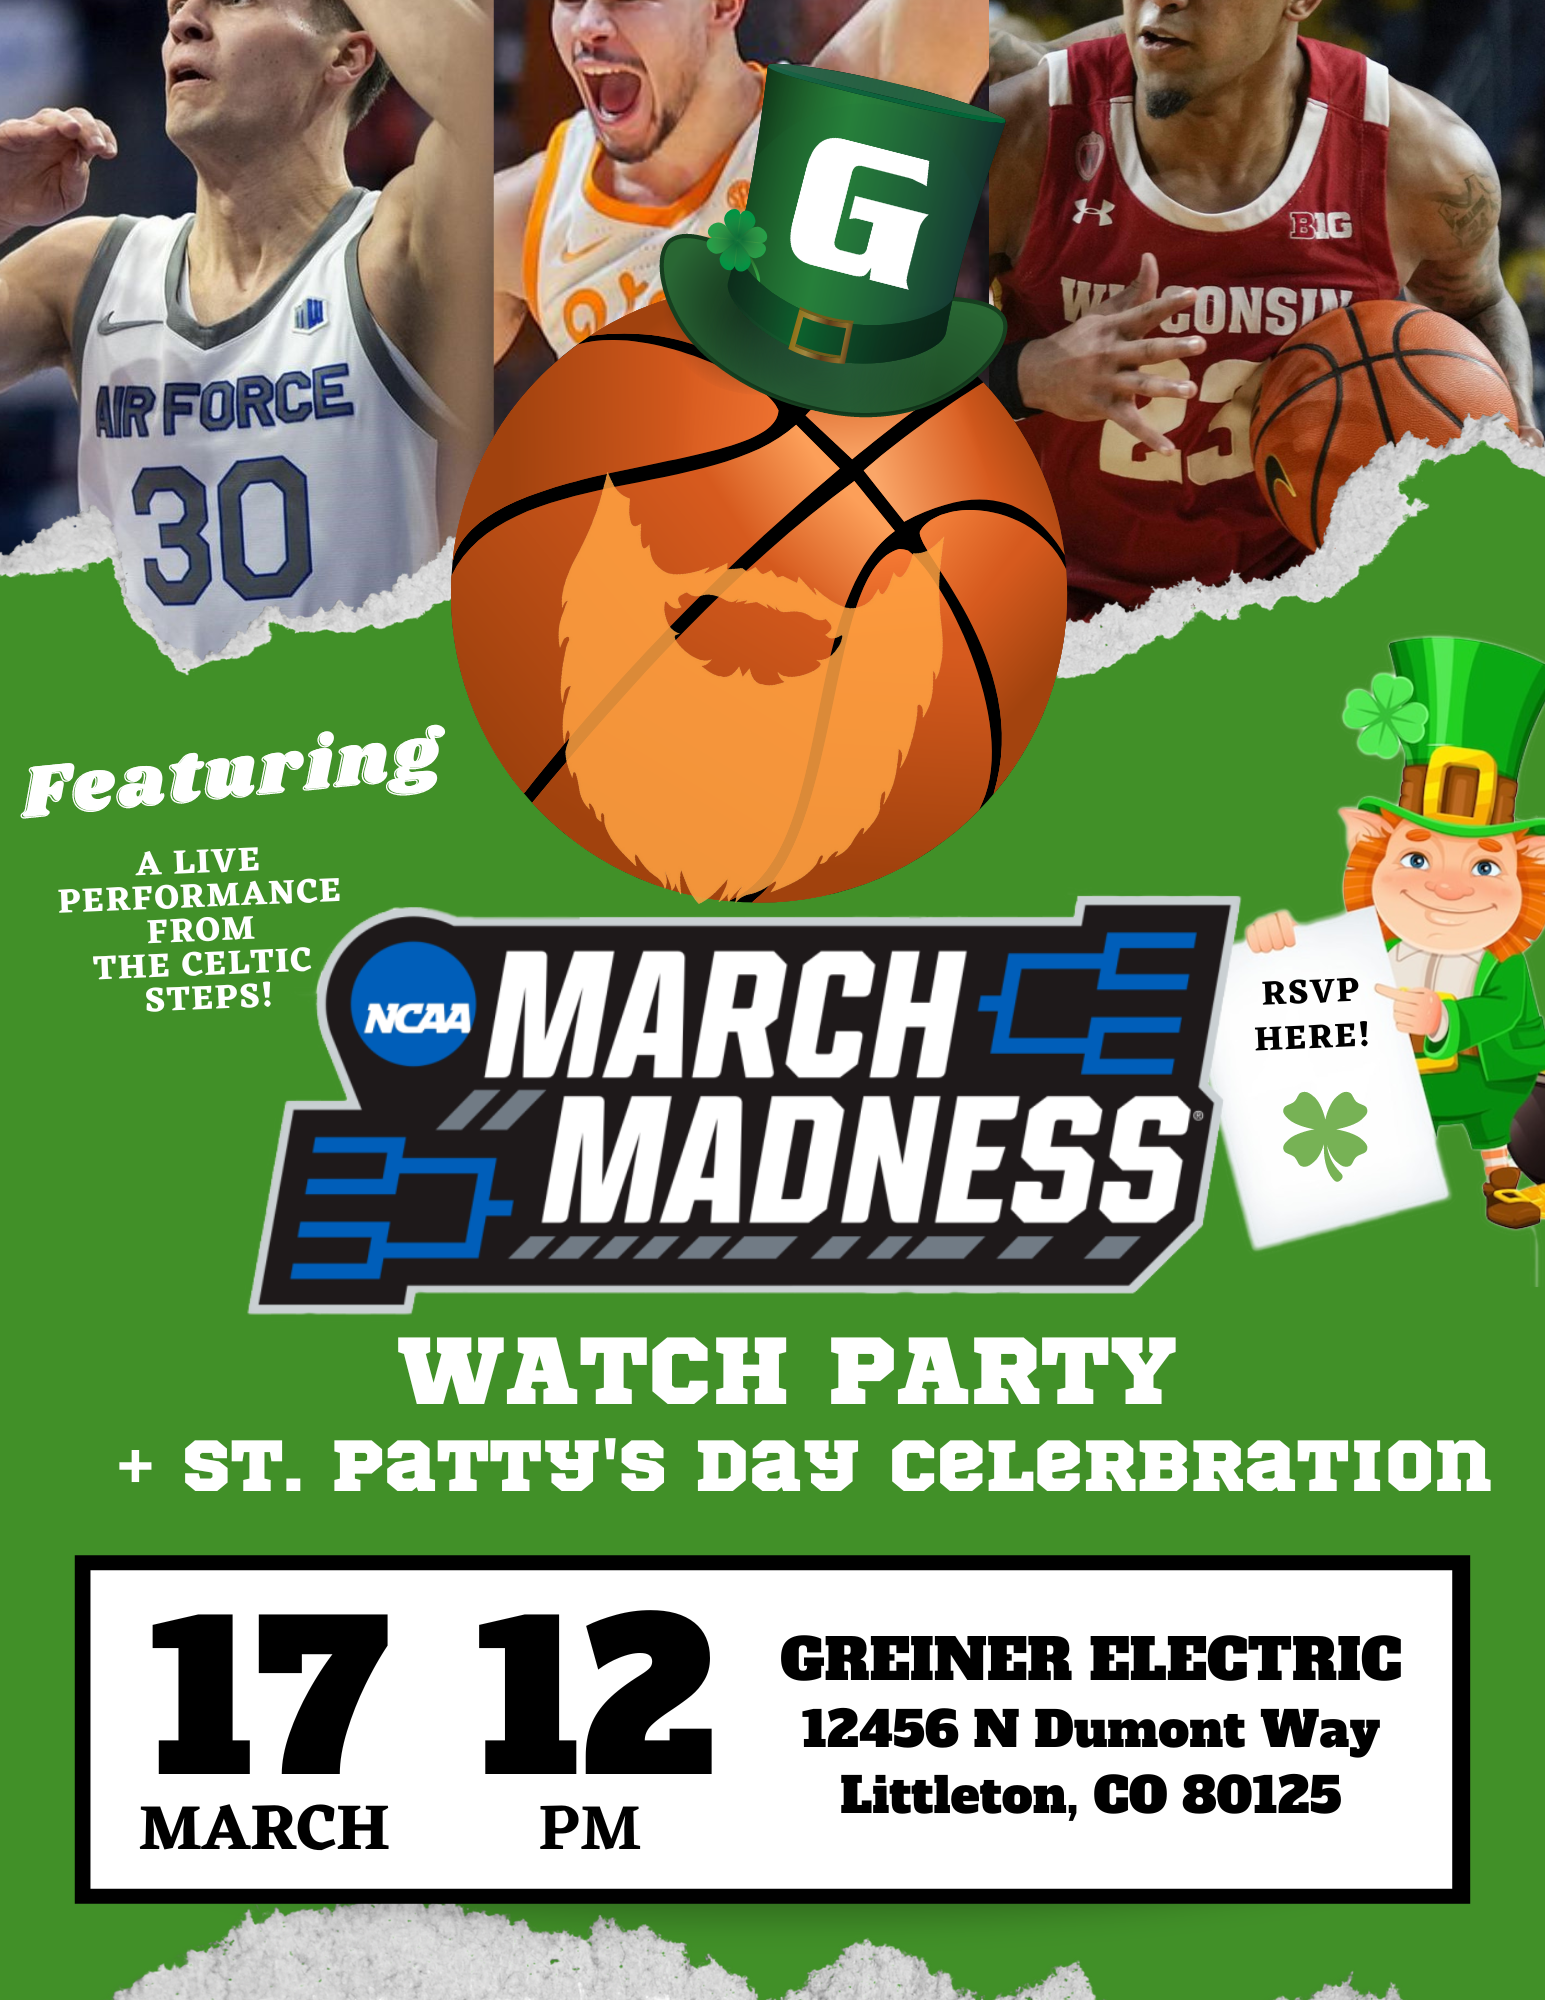 
St. Patty's Day March Madness Viewing Party